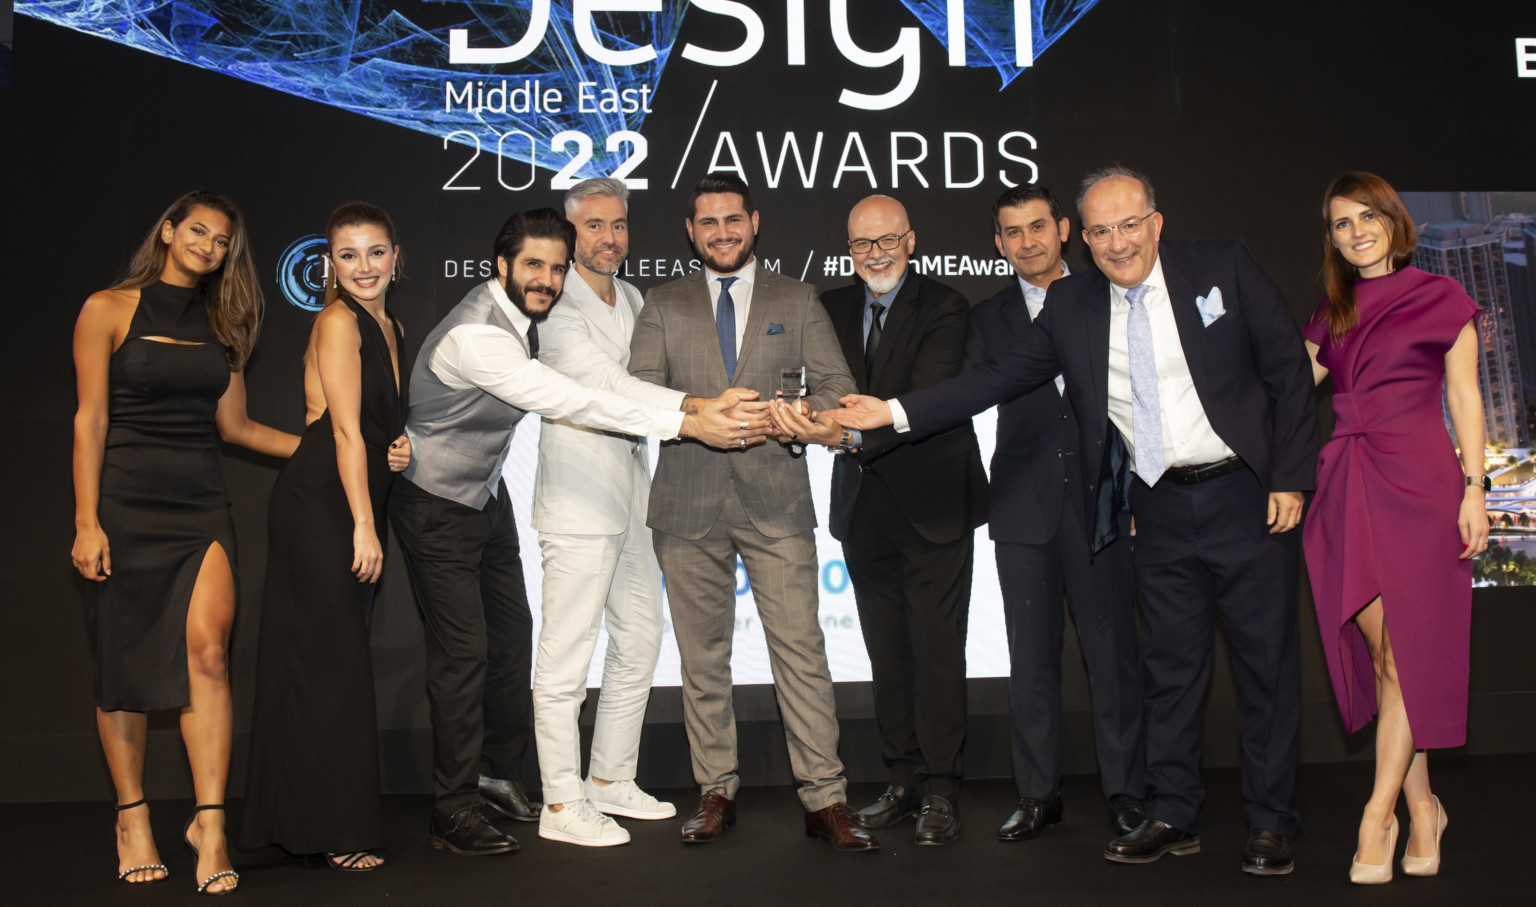 Design team from the DLR Group Dubai office at the Design Middle East awards with the trophy for Interior Design Firm of the Year